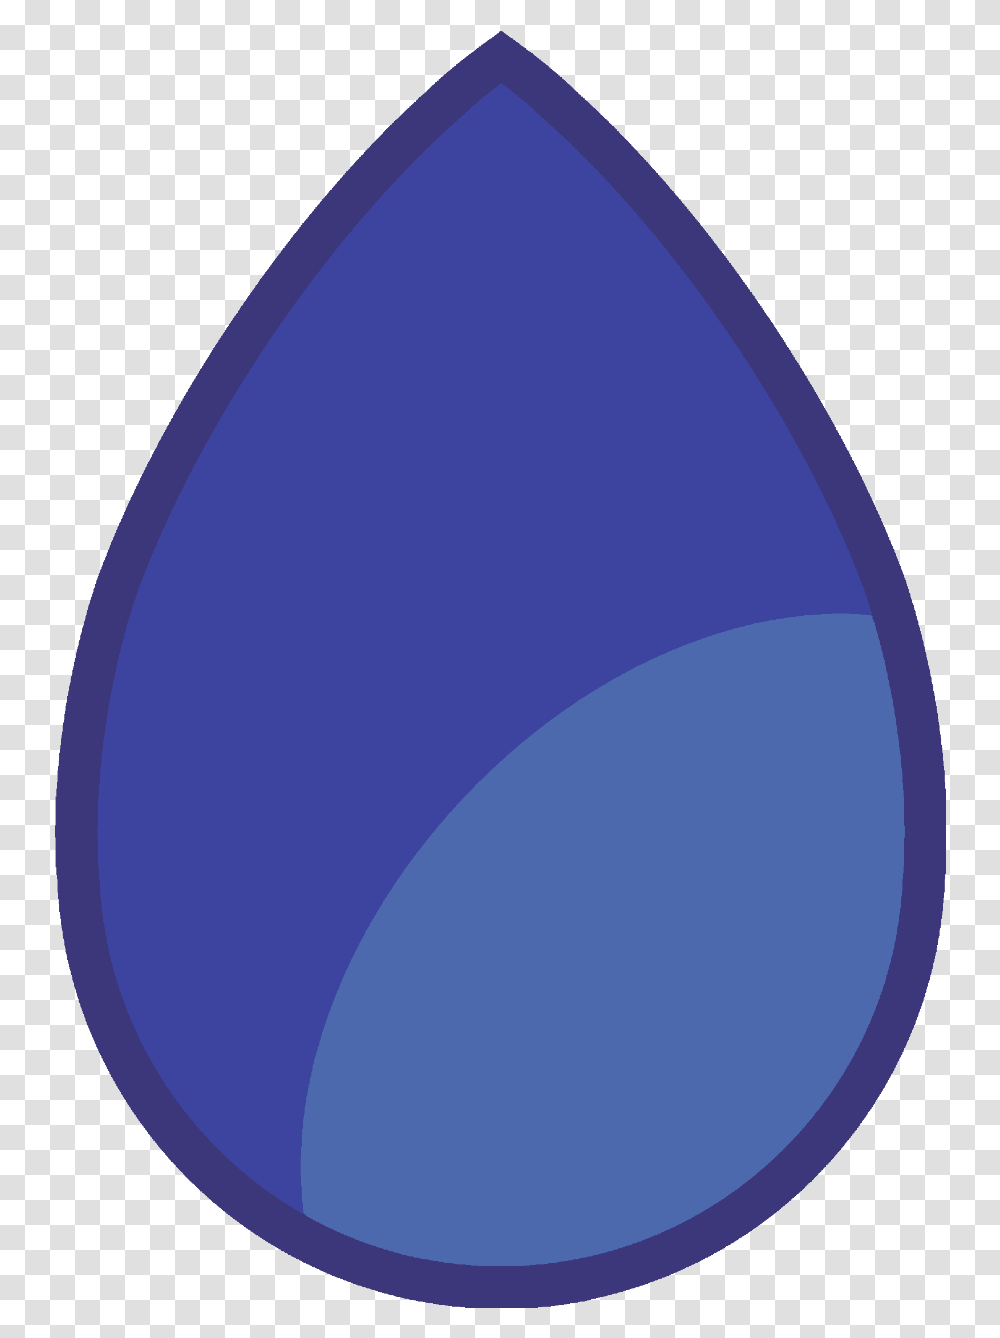 Download Hd Lapis Beach House Night Gem Circle, Egg, Food, Moon, Outer Space Transparent Png